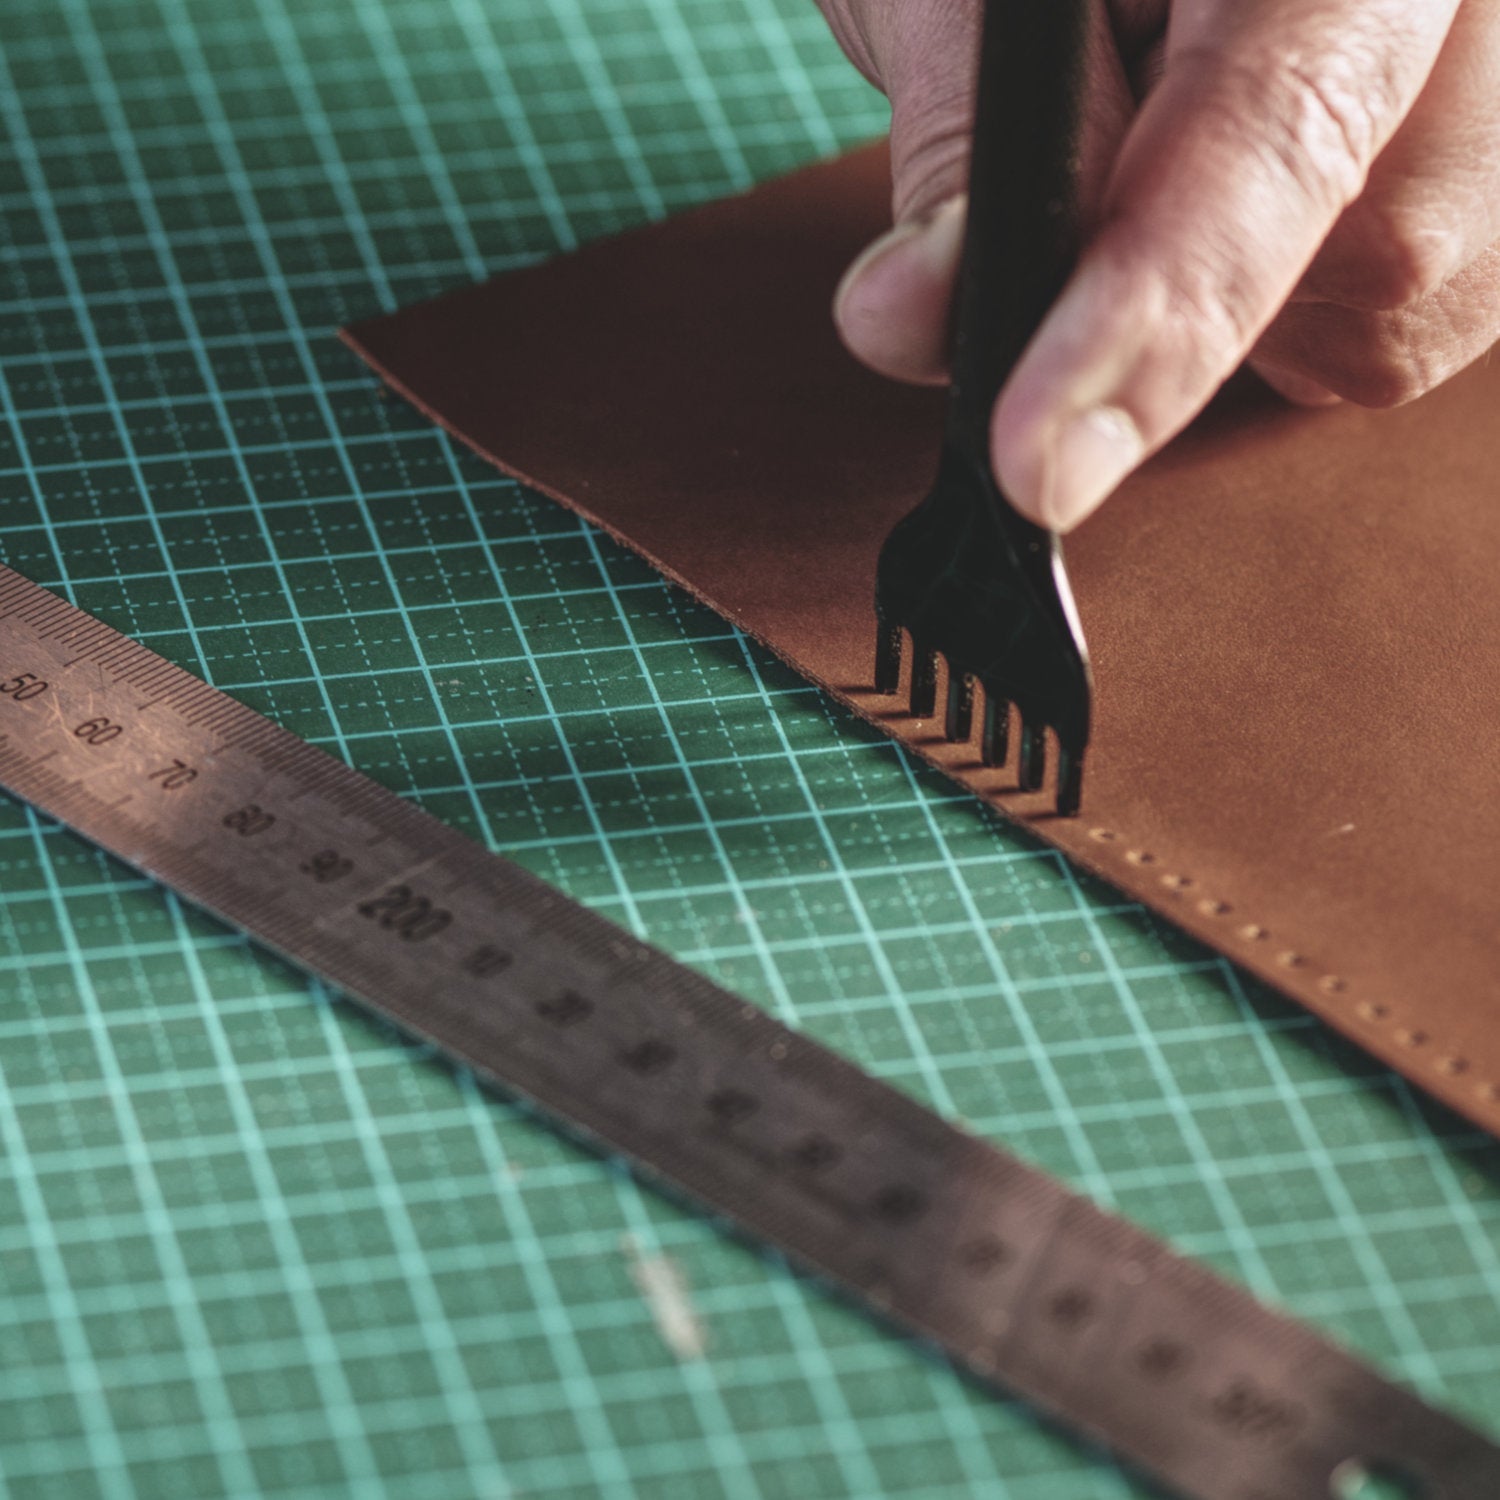 Full-grain leather OnePlus sleeve - Turquoise leather with two pockets for cards